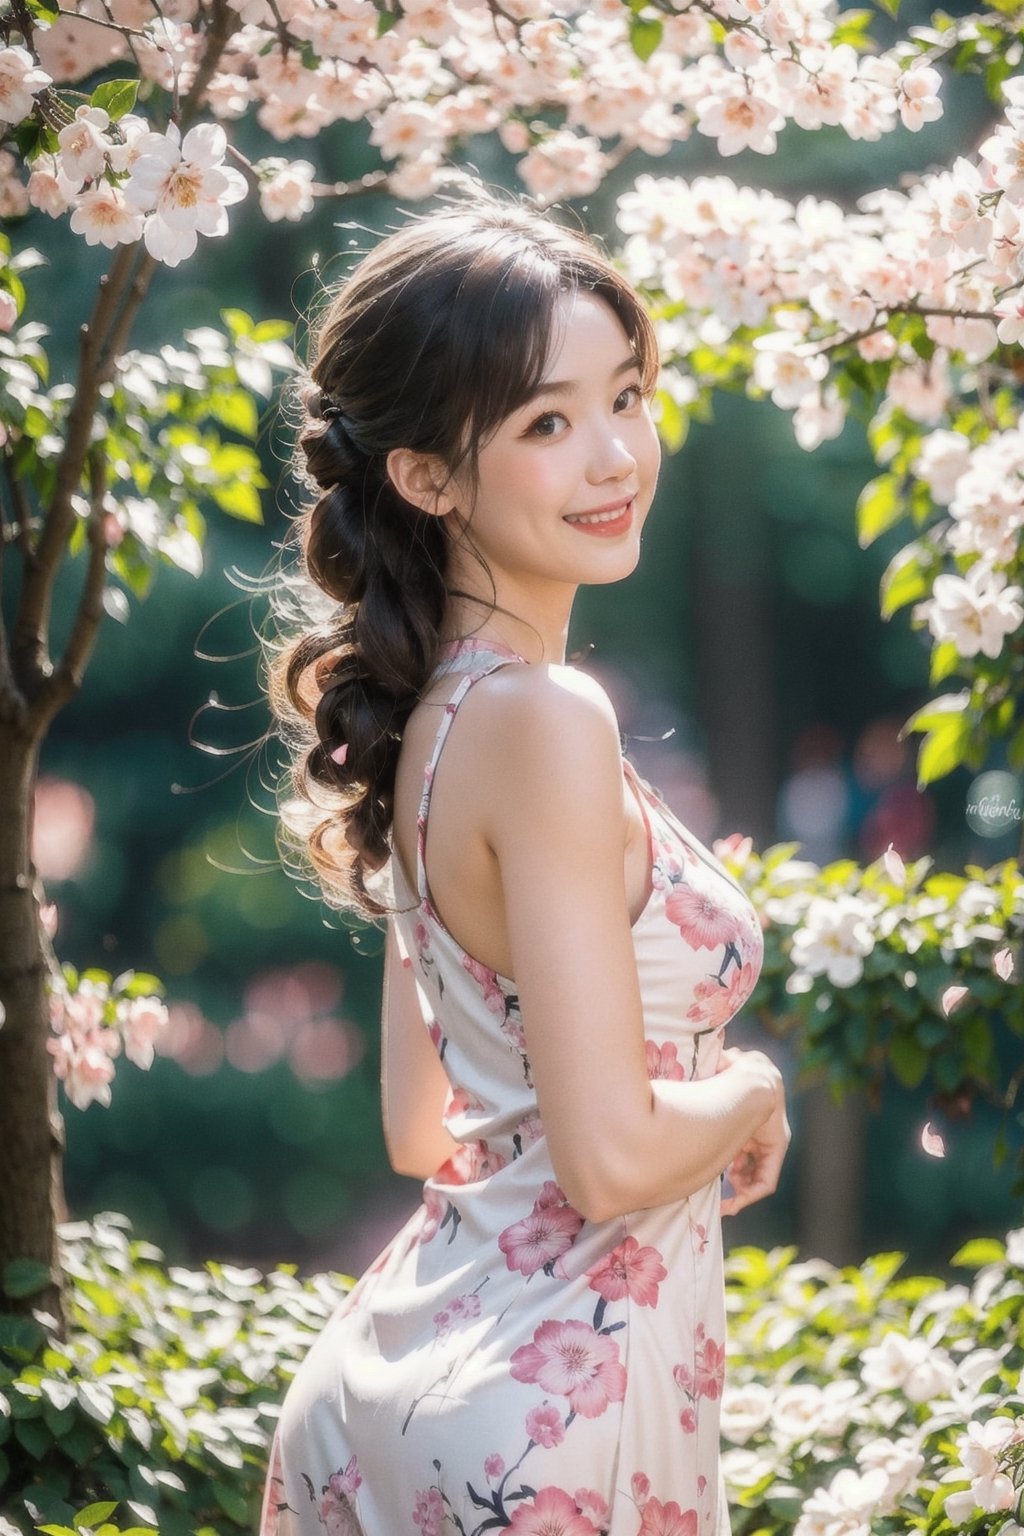 Real photo, a Japanese woman, 19 years old girl, 
 wearing a pink china cheongsam, raising her hands to catch the falling cherry blossoms under the cherry blossom tree, smiling, the pink cherry blossom petals are flying all over the picture, clear and bright, super High quality, exquisite details, delicate and clear facial features, clear body,
,1 girl, Double exposure, real person, Dusk, twilight, sunshine light from back, milf, china dress with heart cutout